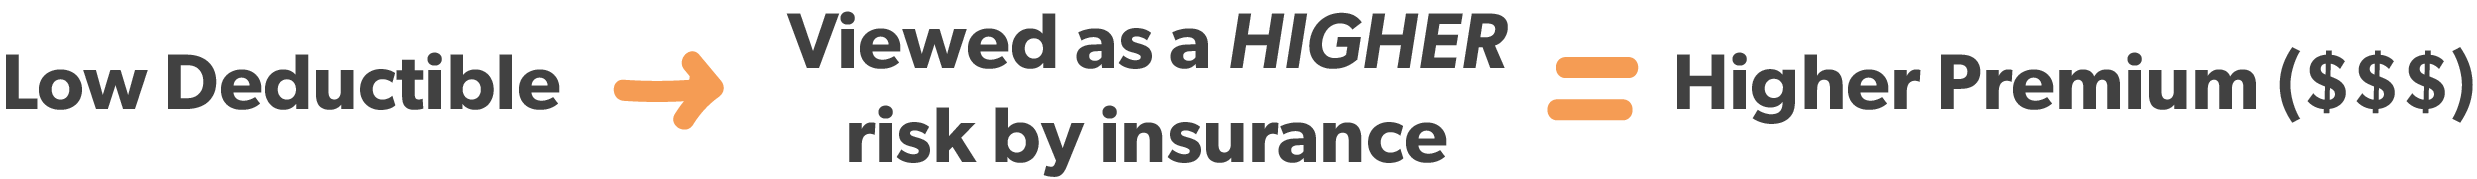 What a high premium means when it comes to your deductible